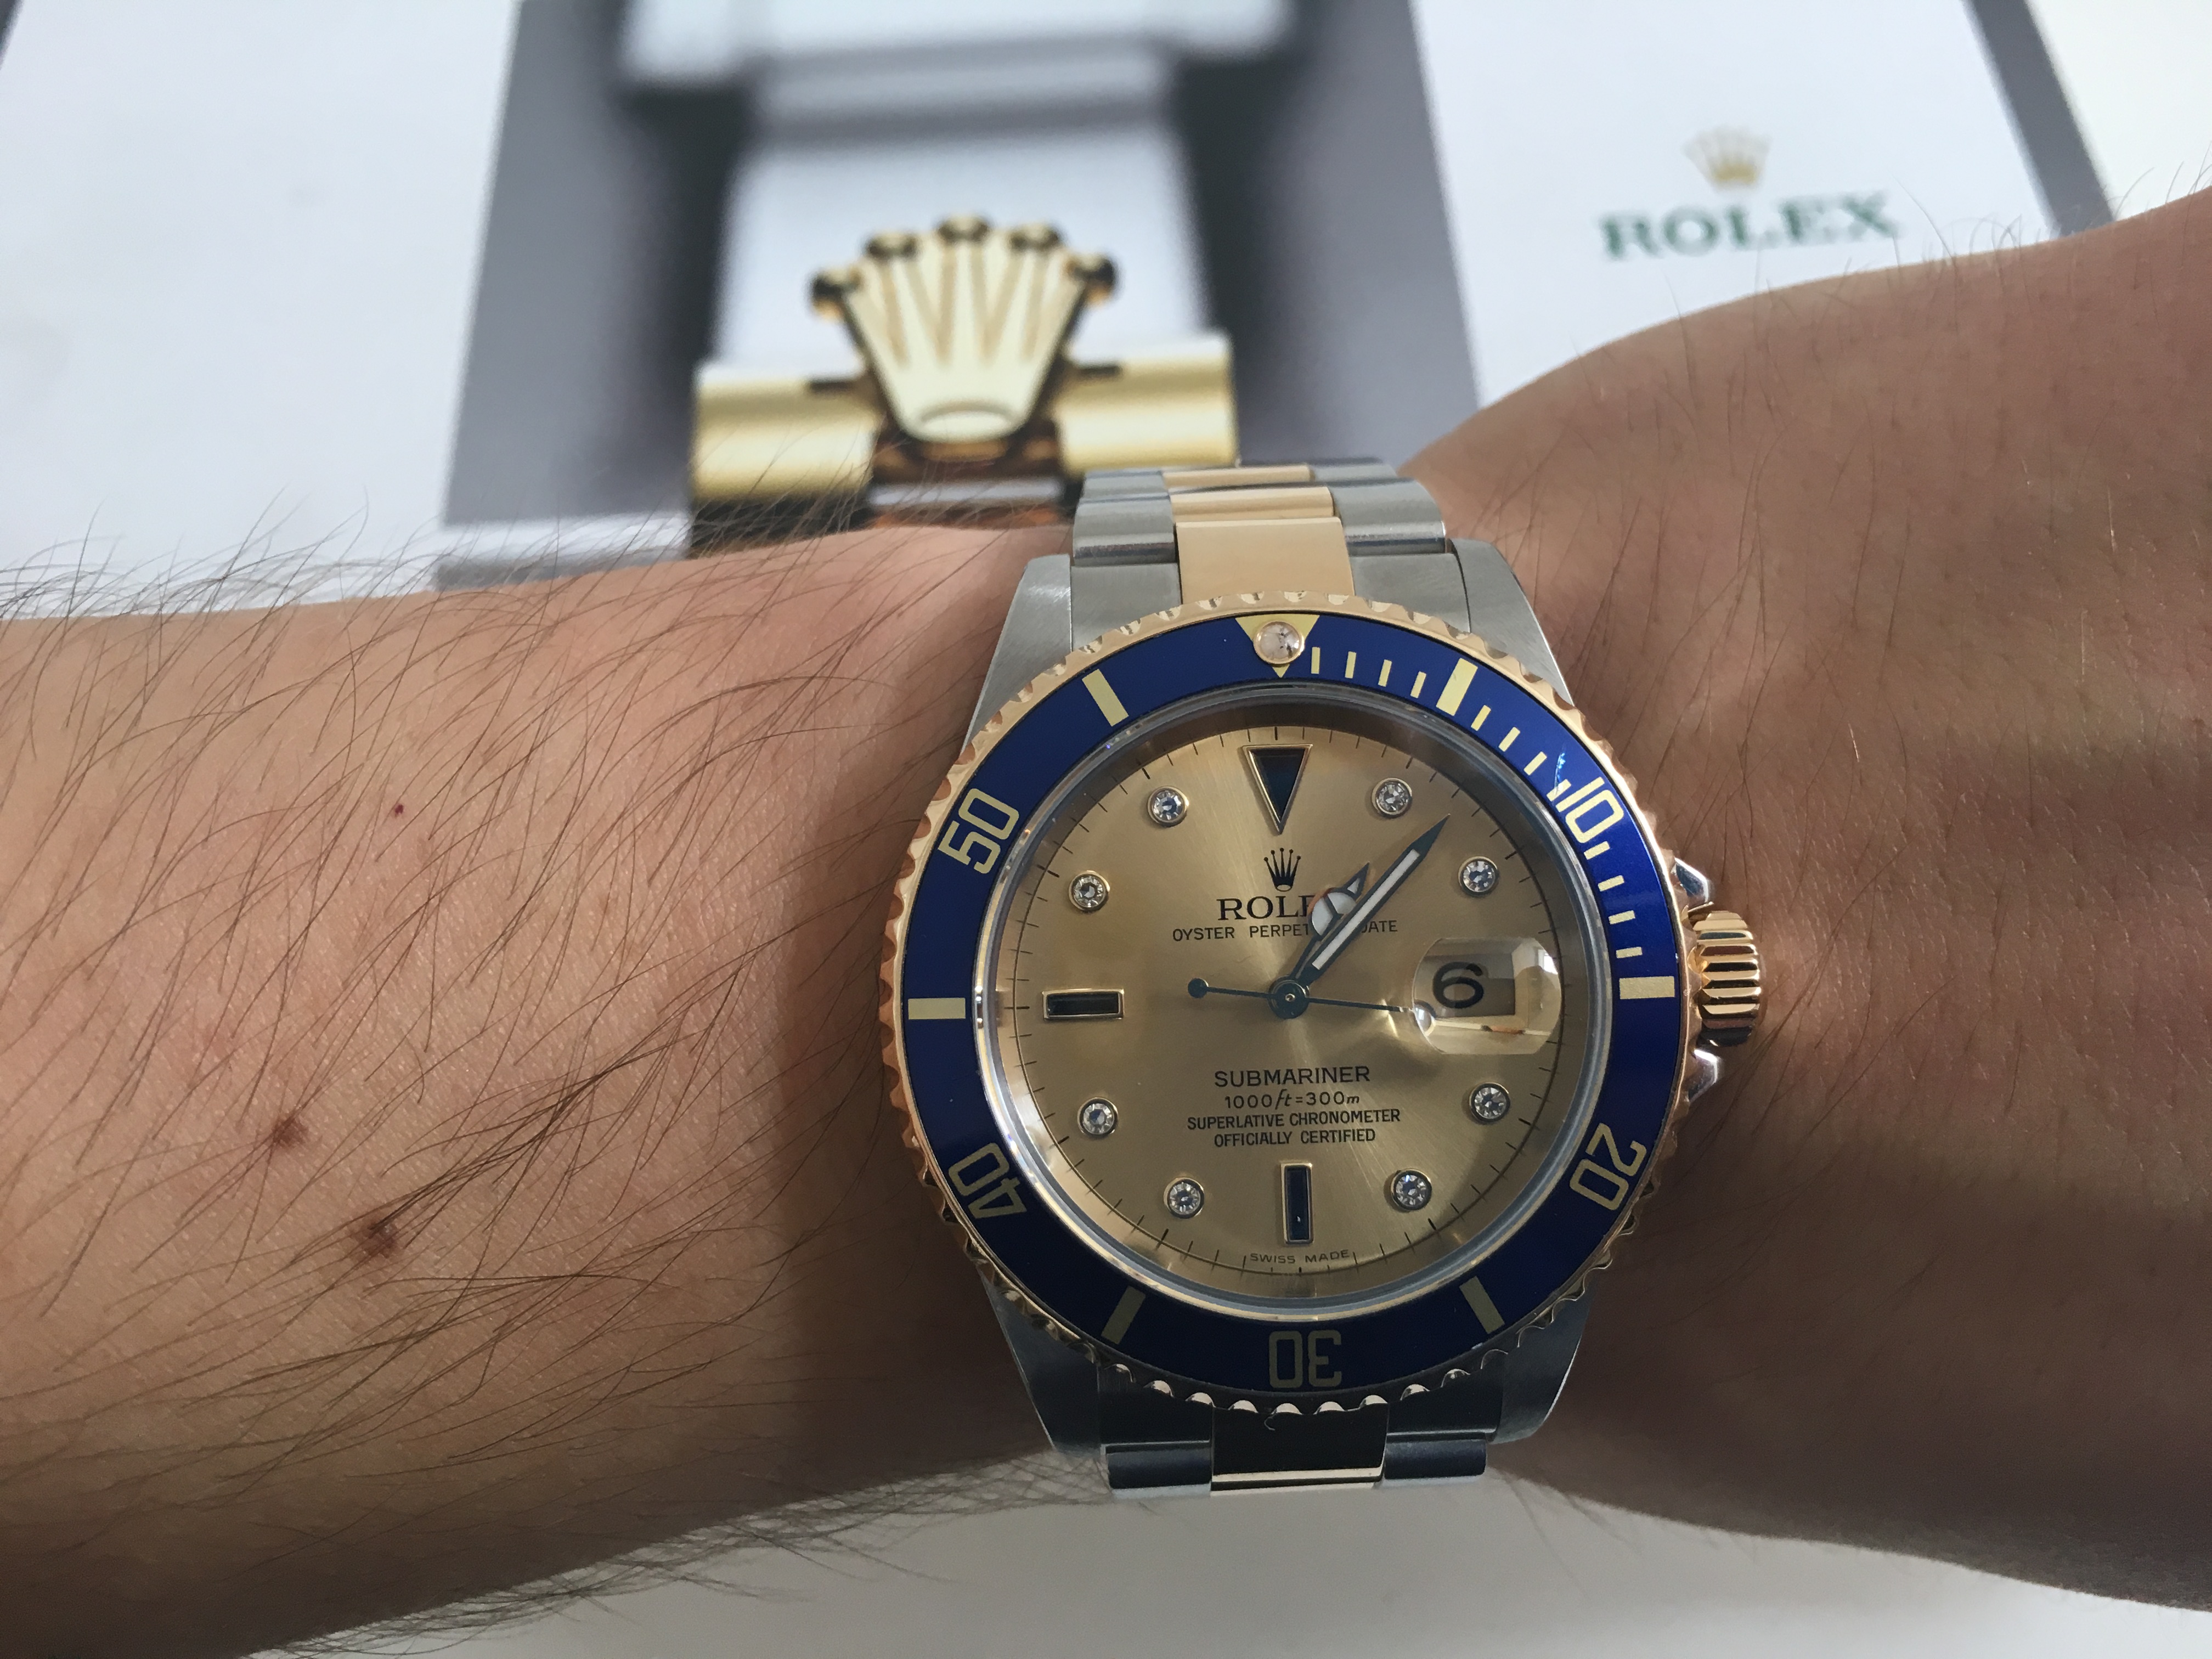 Quick Look at the Rolex Submariner 116613LB and 16613